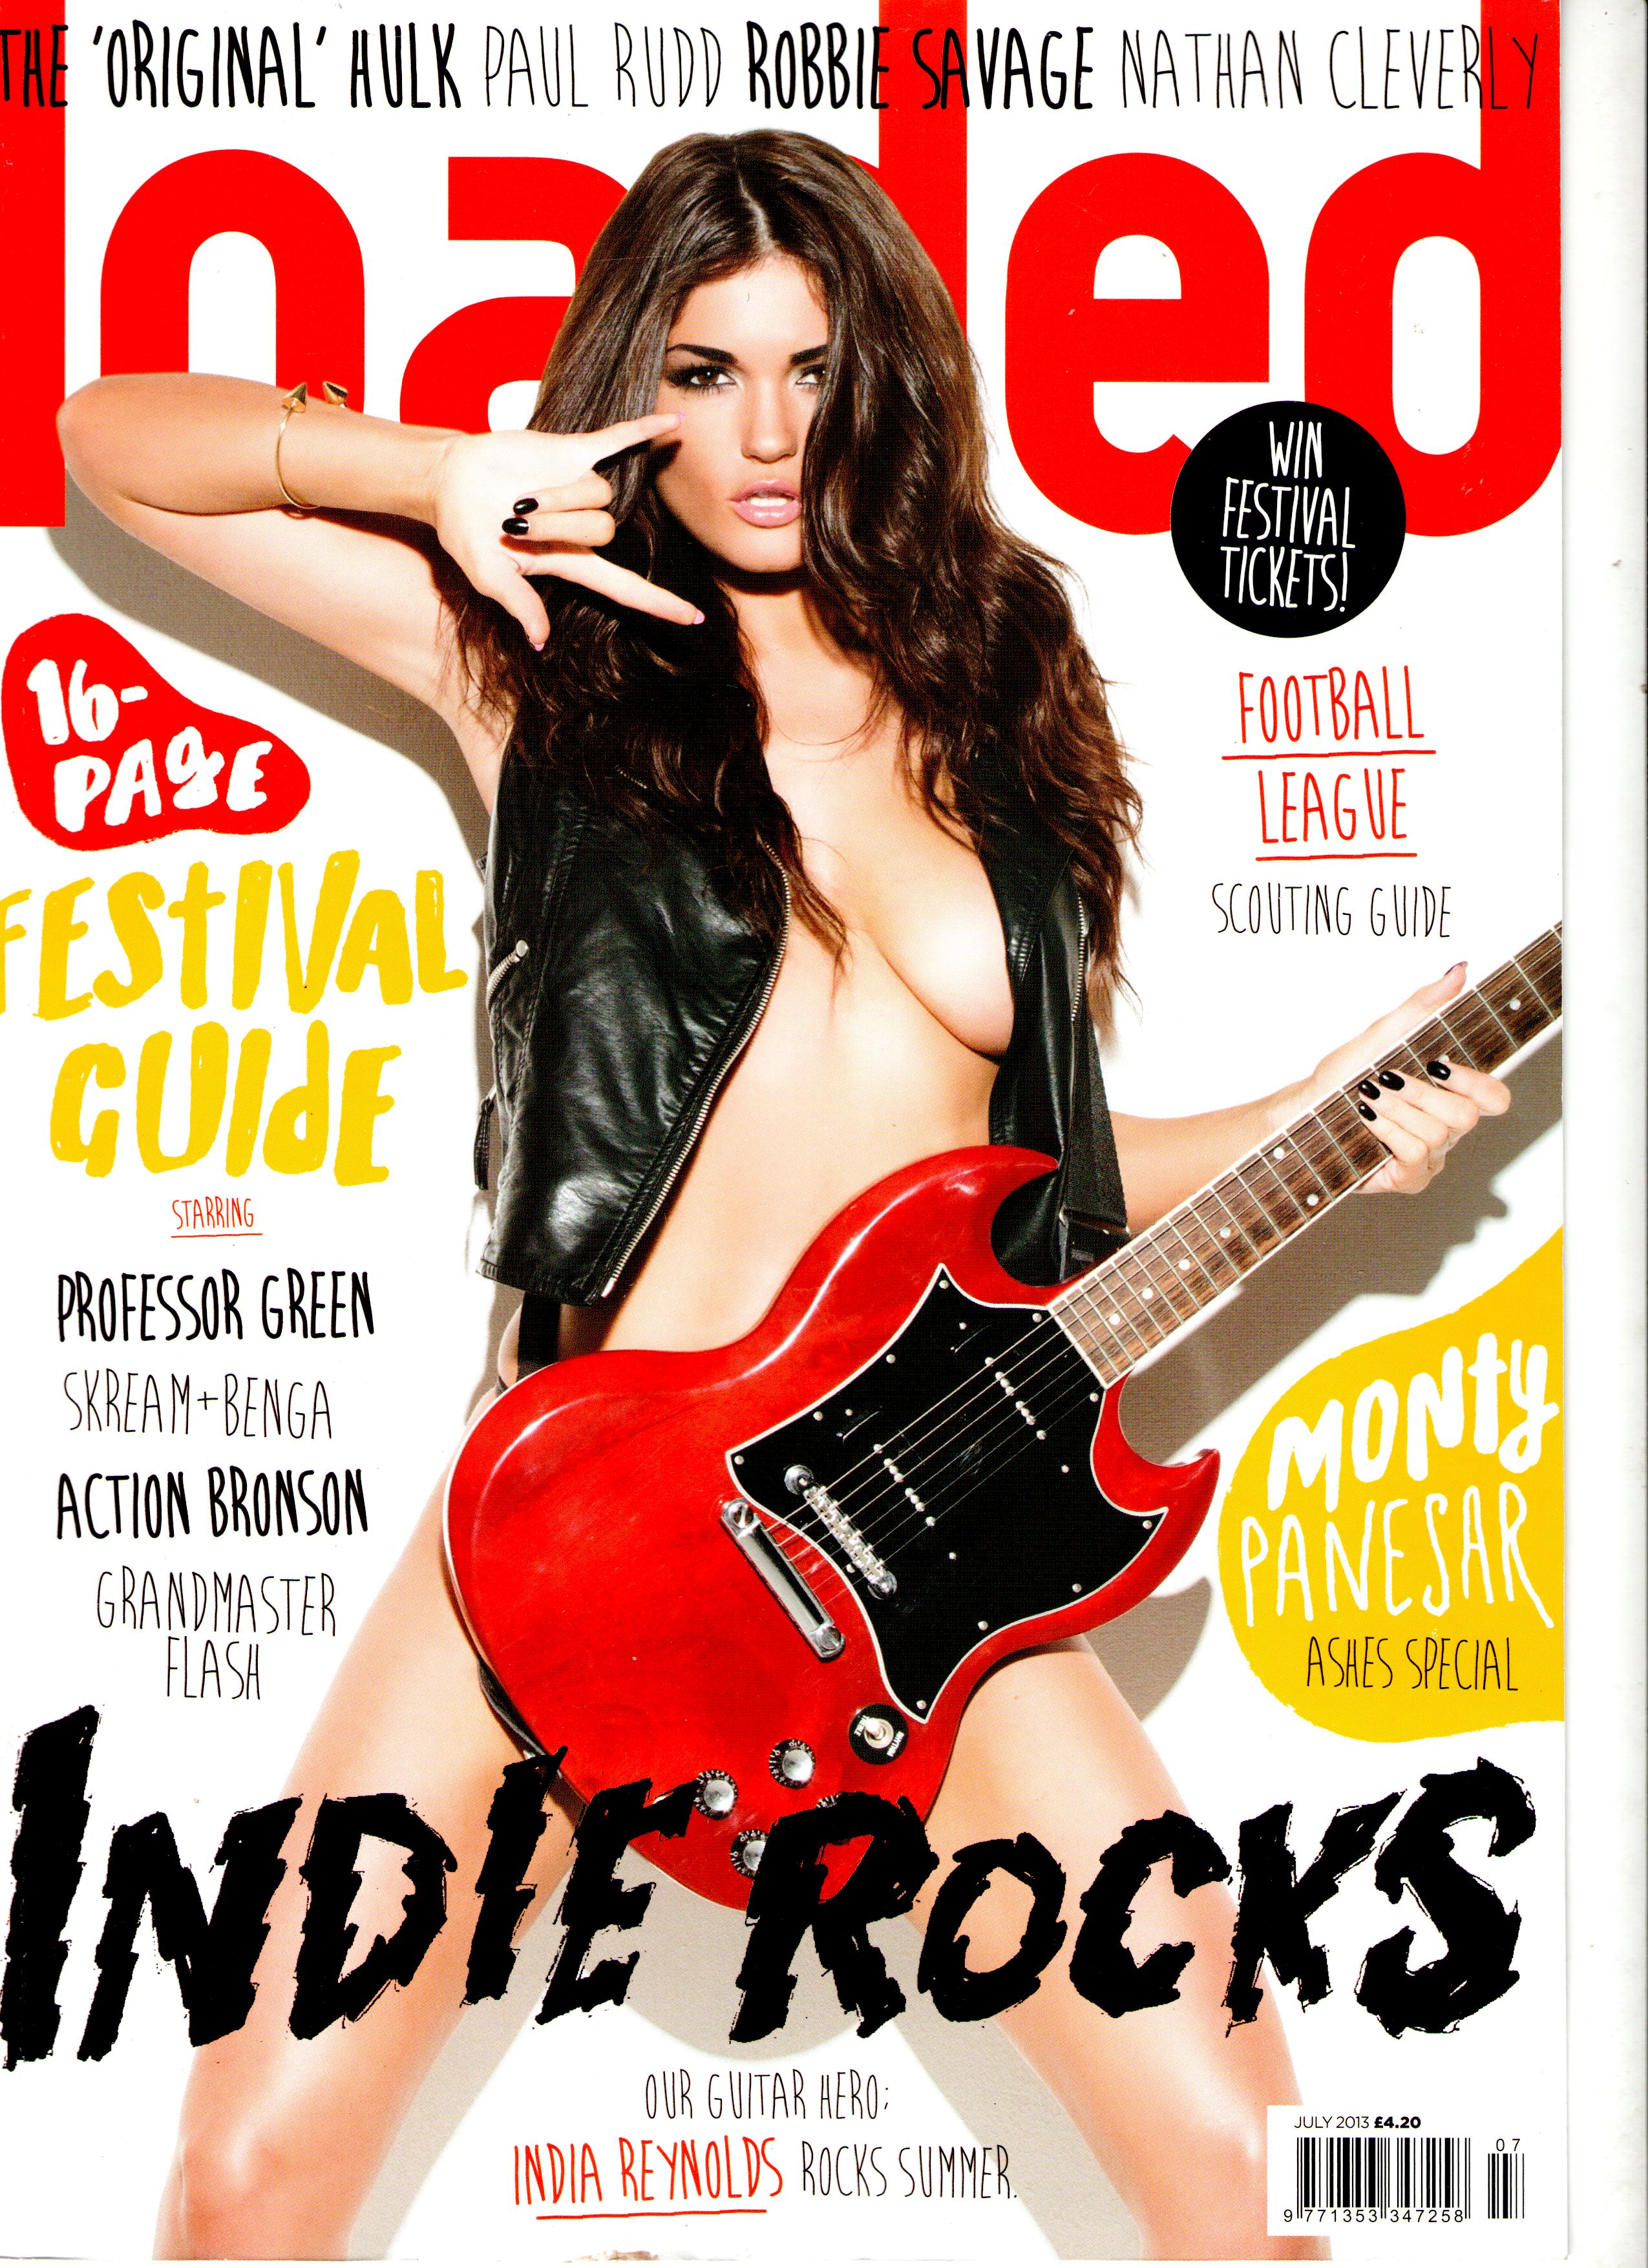 India Reynolds is our Guitar Hero for Loaded Magazine